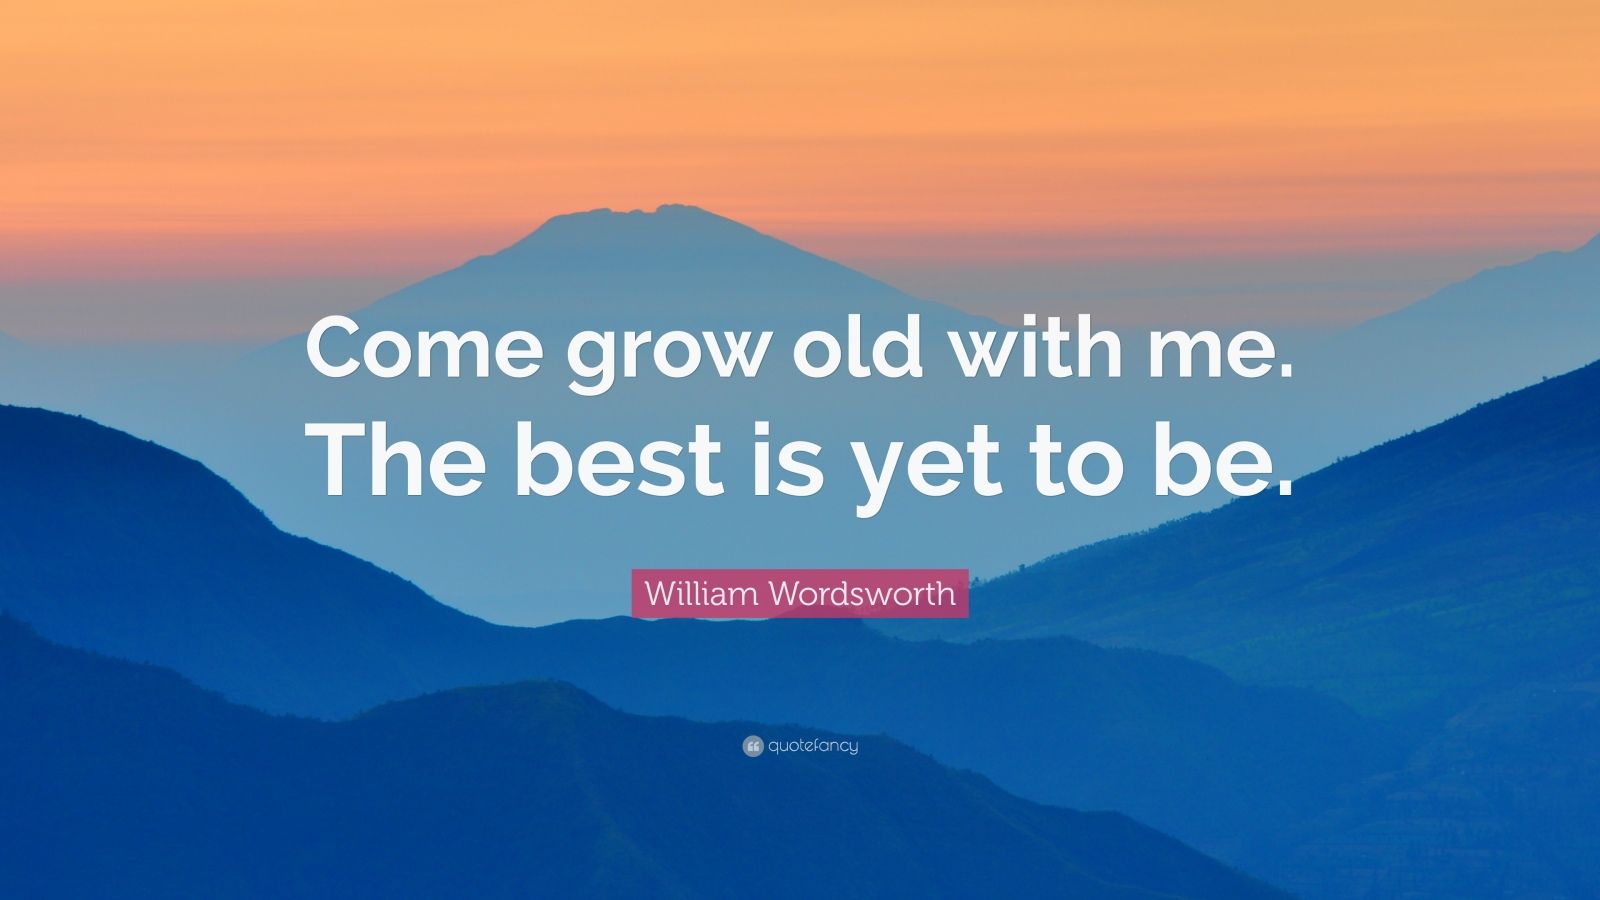 William Wordsworth Quote: “Come grow old with me. The best is yet to be